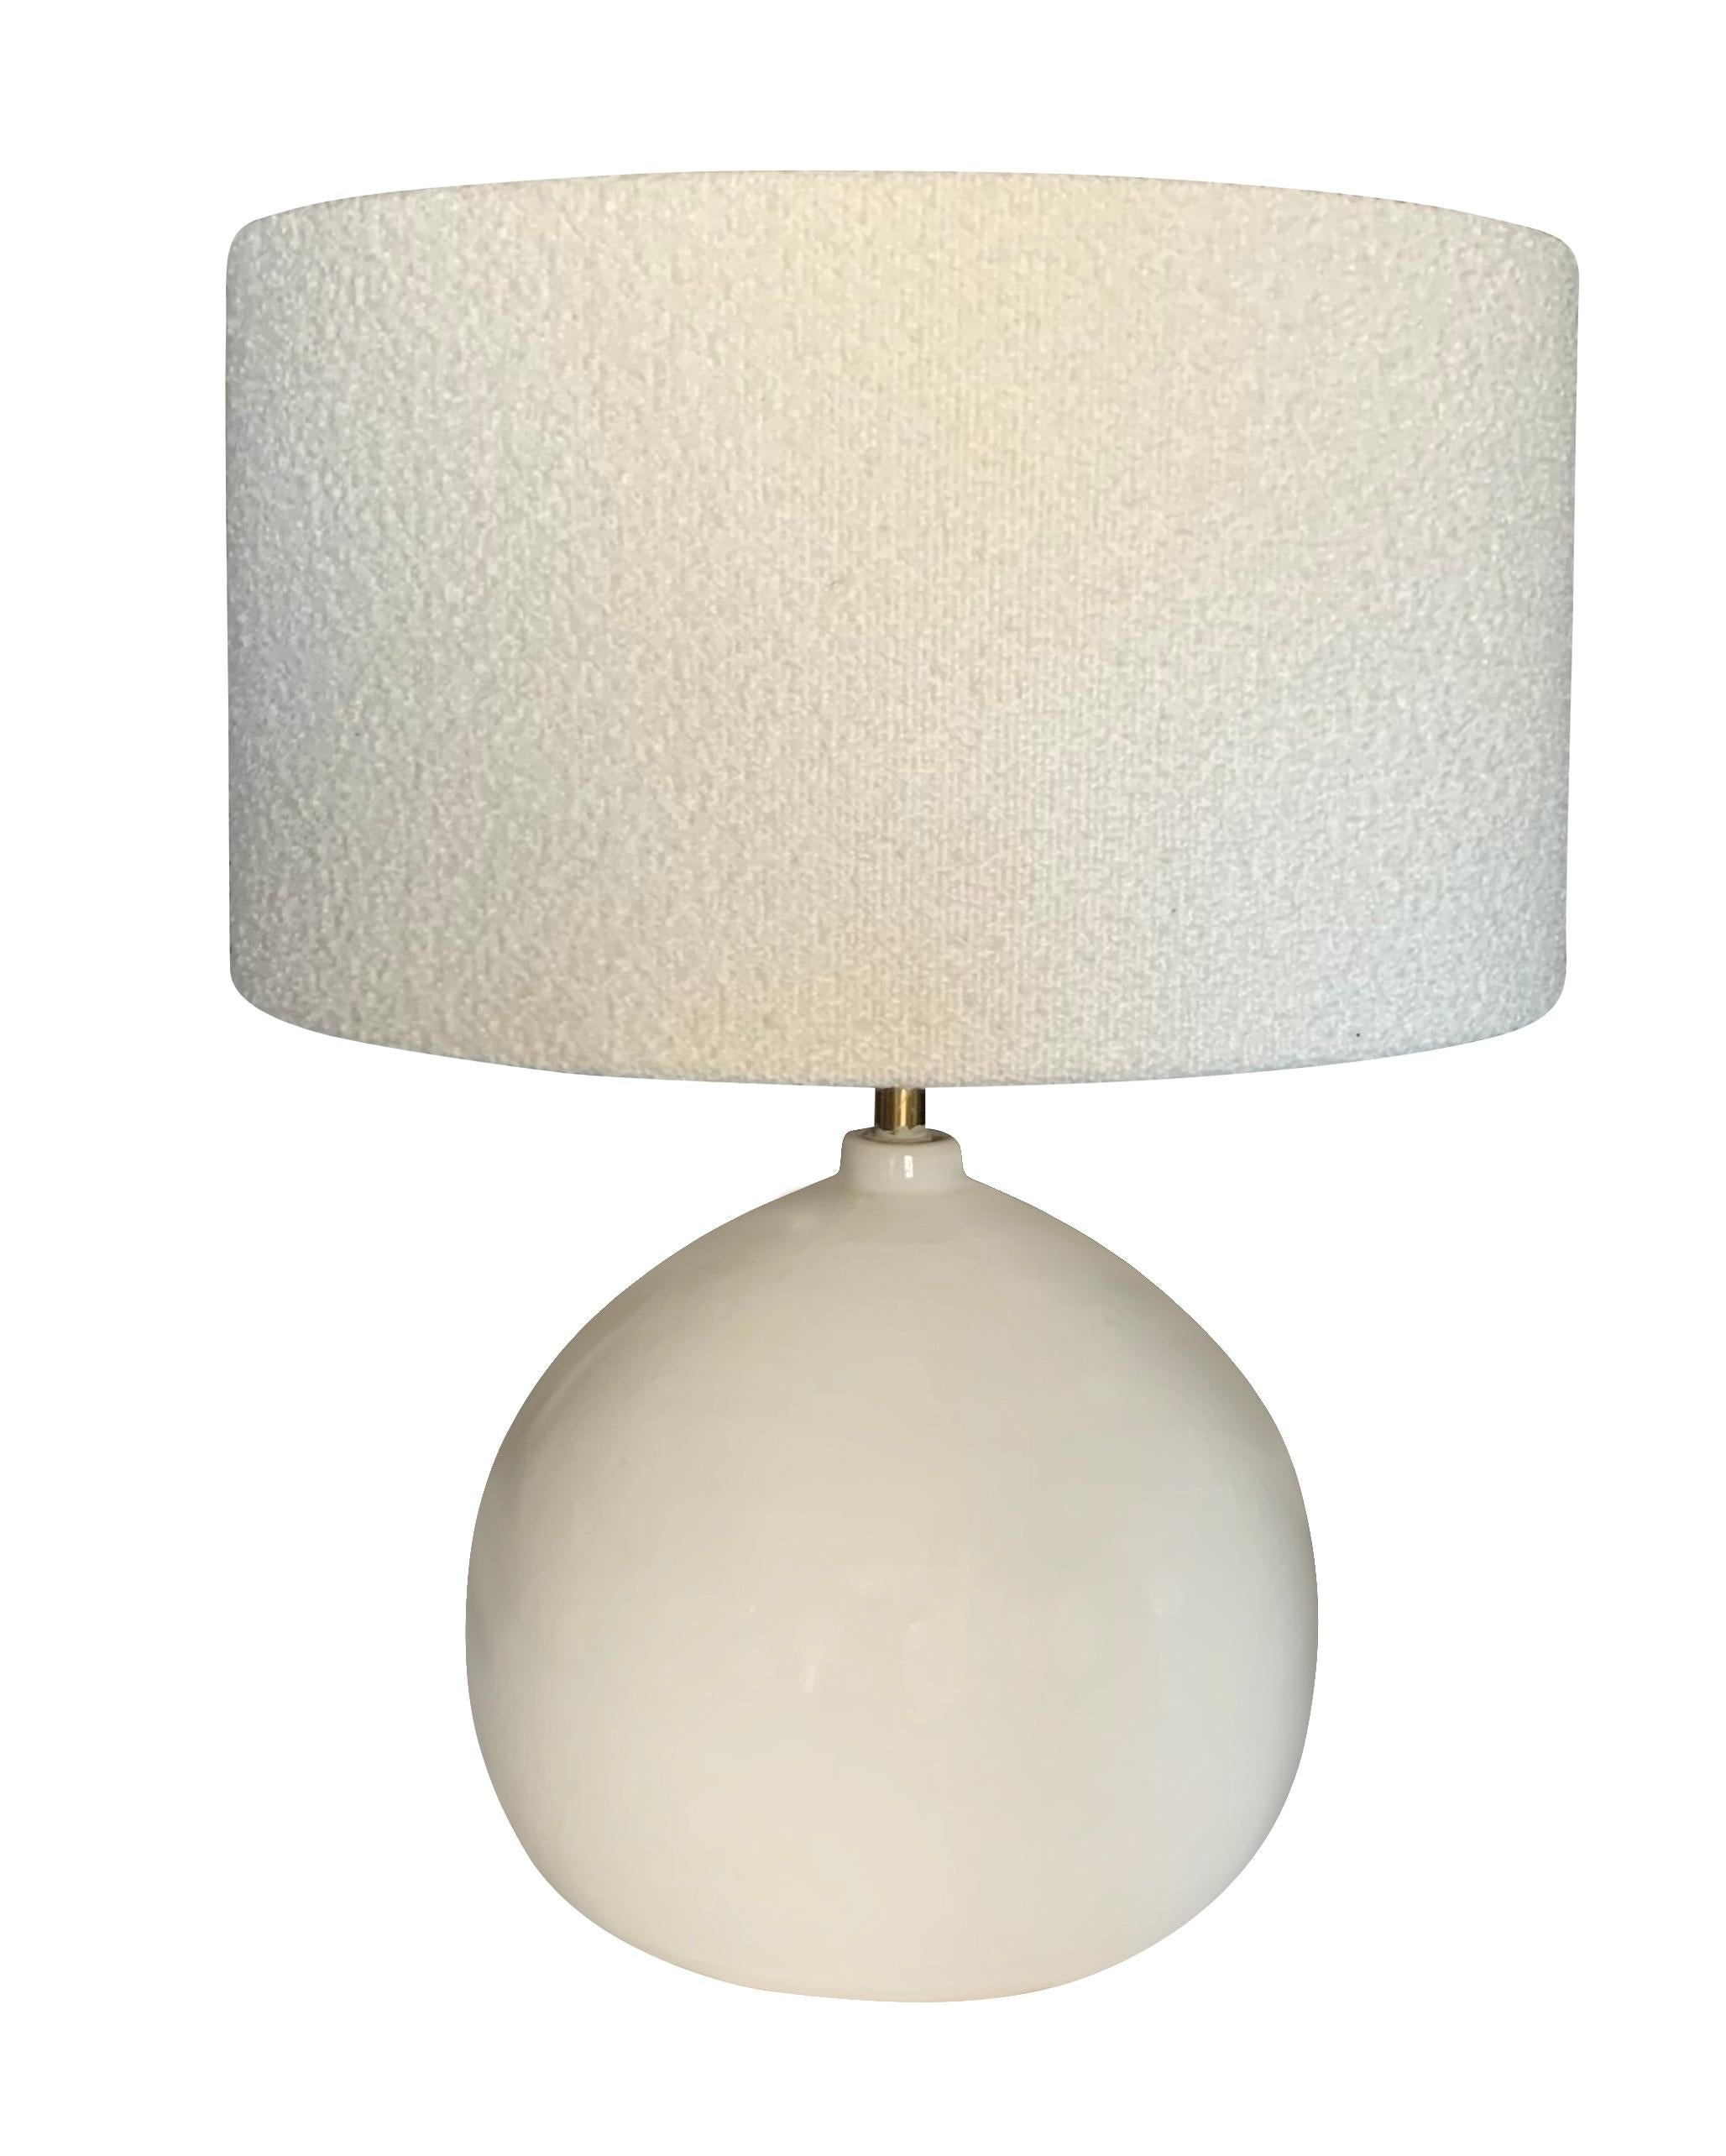 Contemporary Chinese pair cream colored small spout opening lamps.
Round shaped base.
White boucle shades included.
Base diameter measures 10